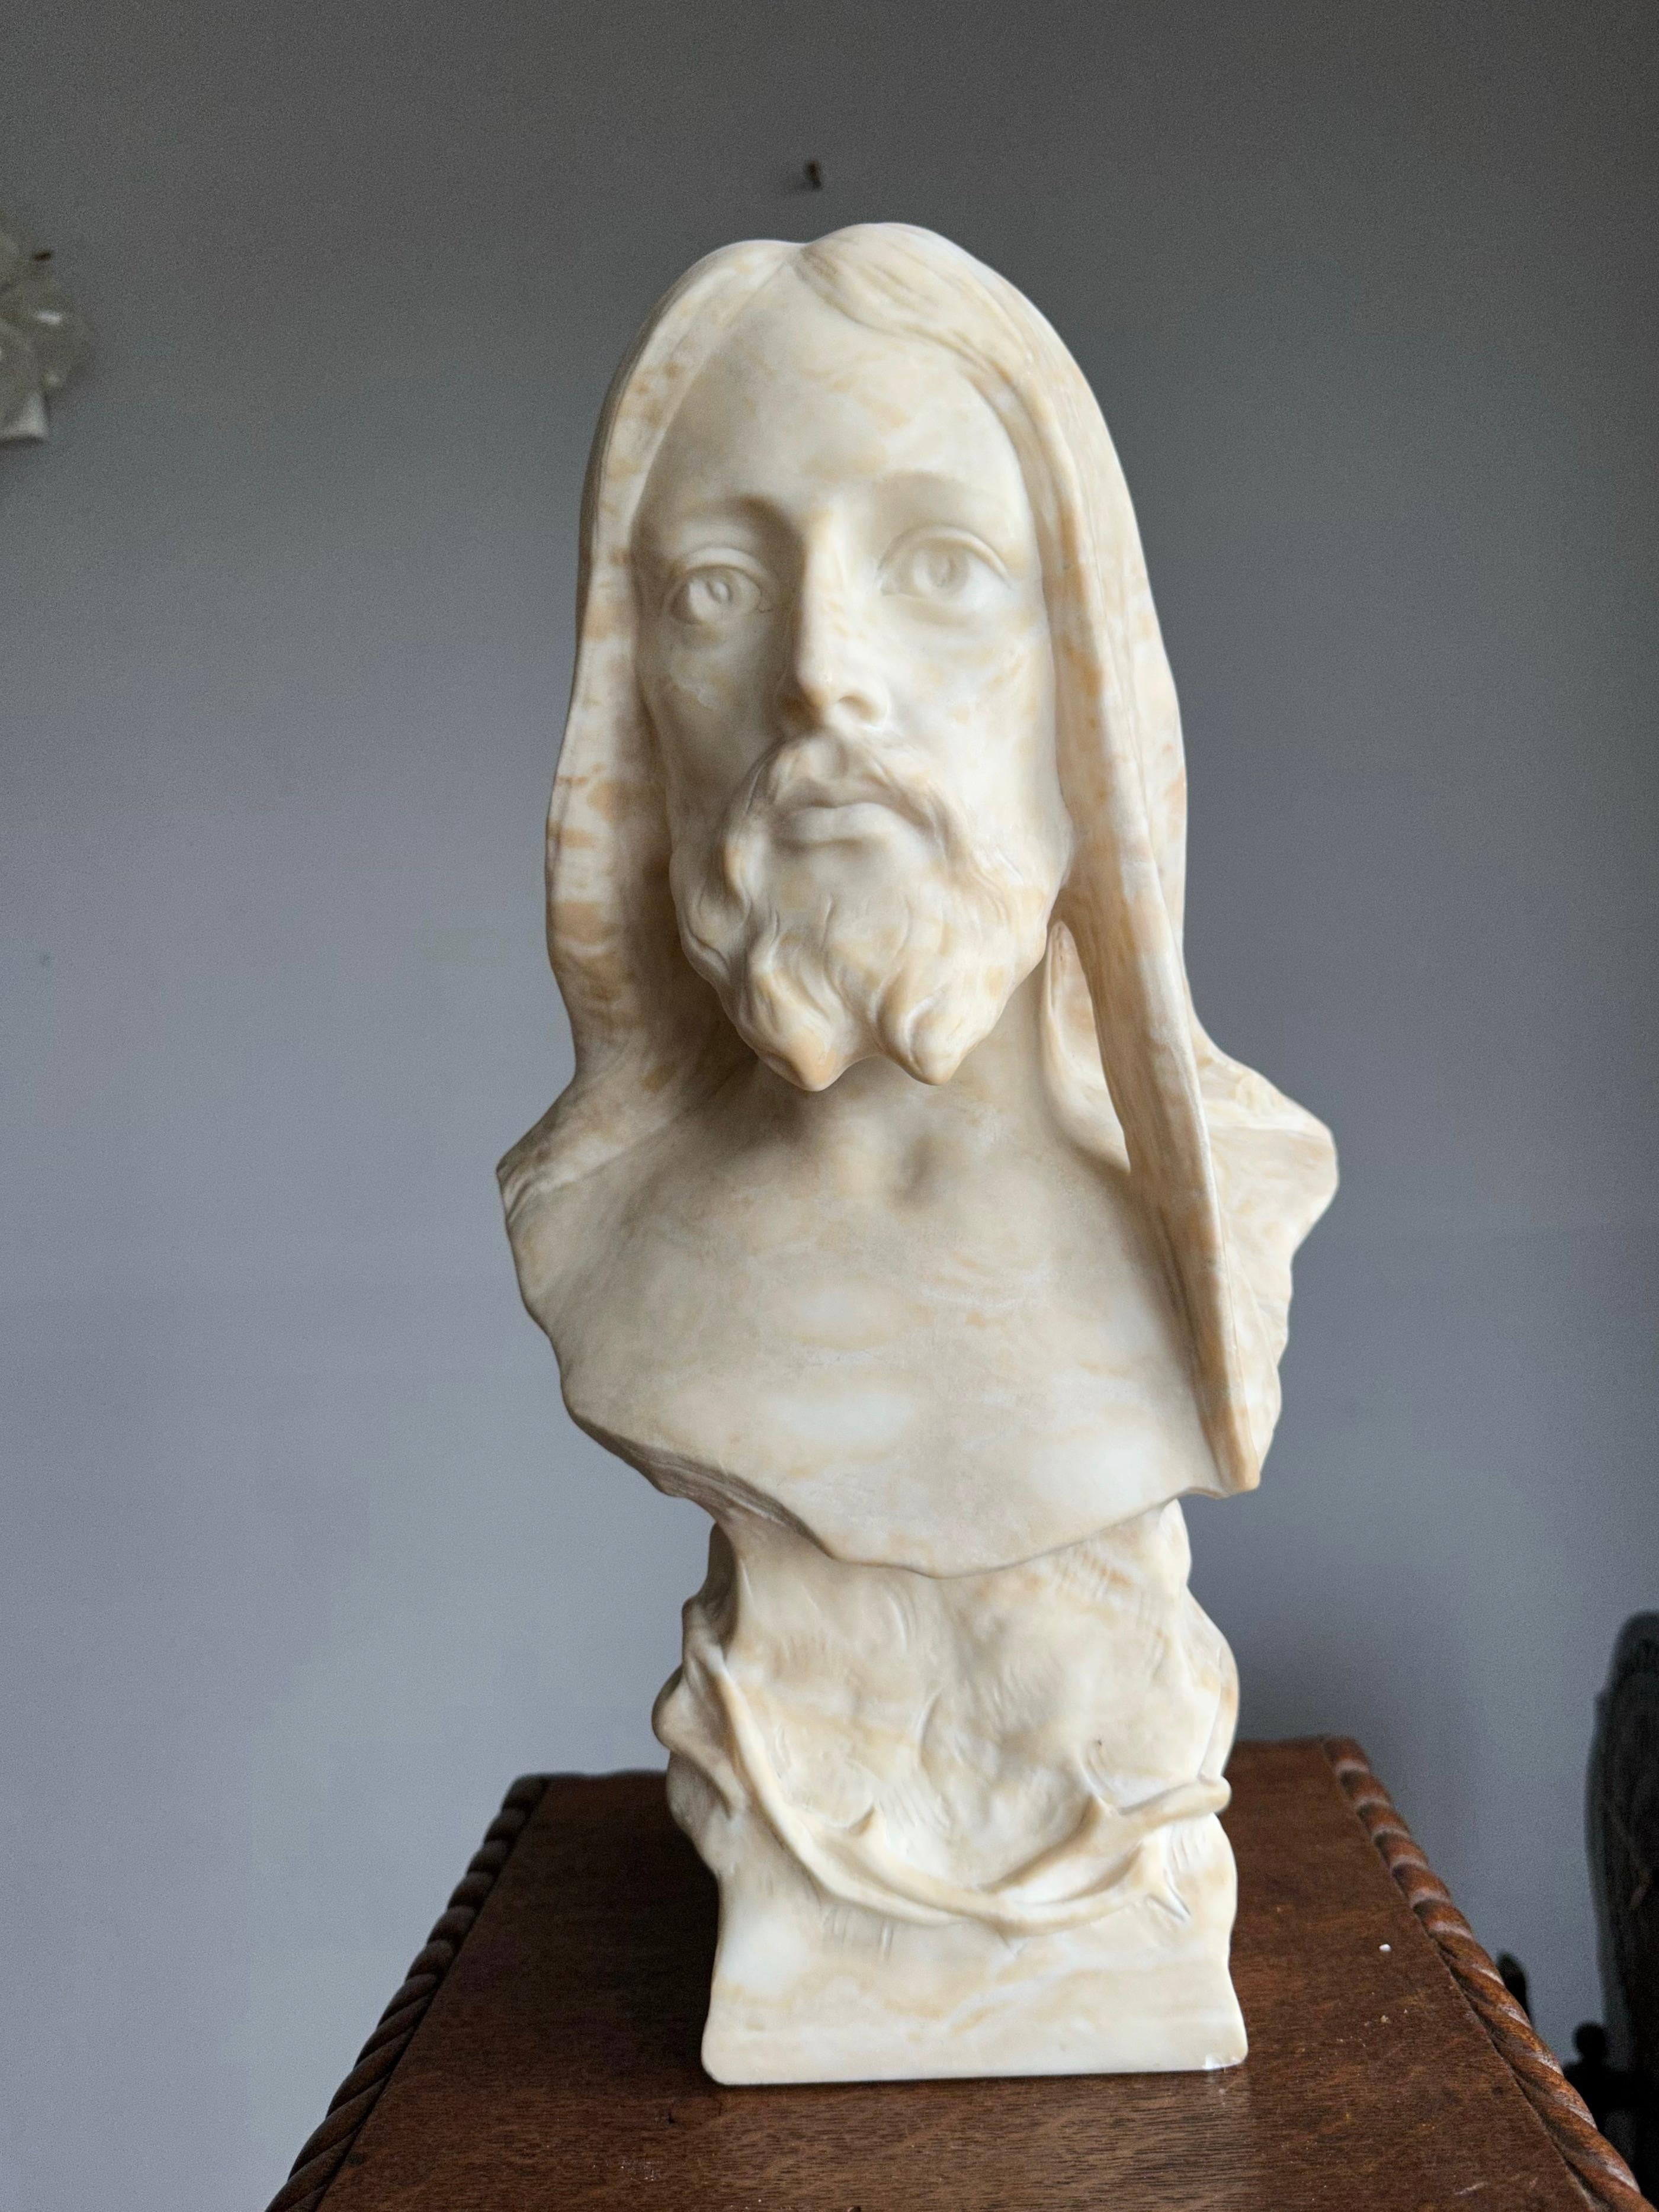 Unique and antique alabaster sculpture of our Lord Jesus.

This gorgeous and large size work of religious art from a church or monastery is ideal for display at home as well. Especially the positive and determined face is beautiful to look at and